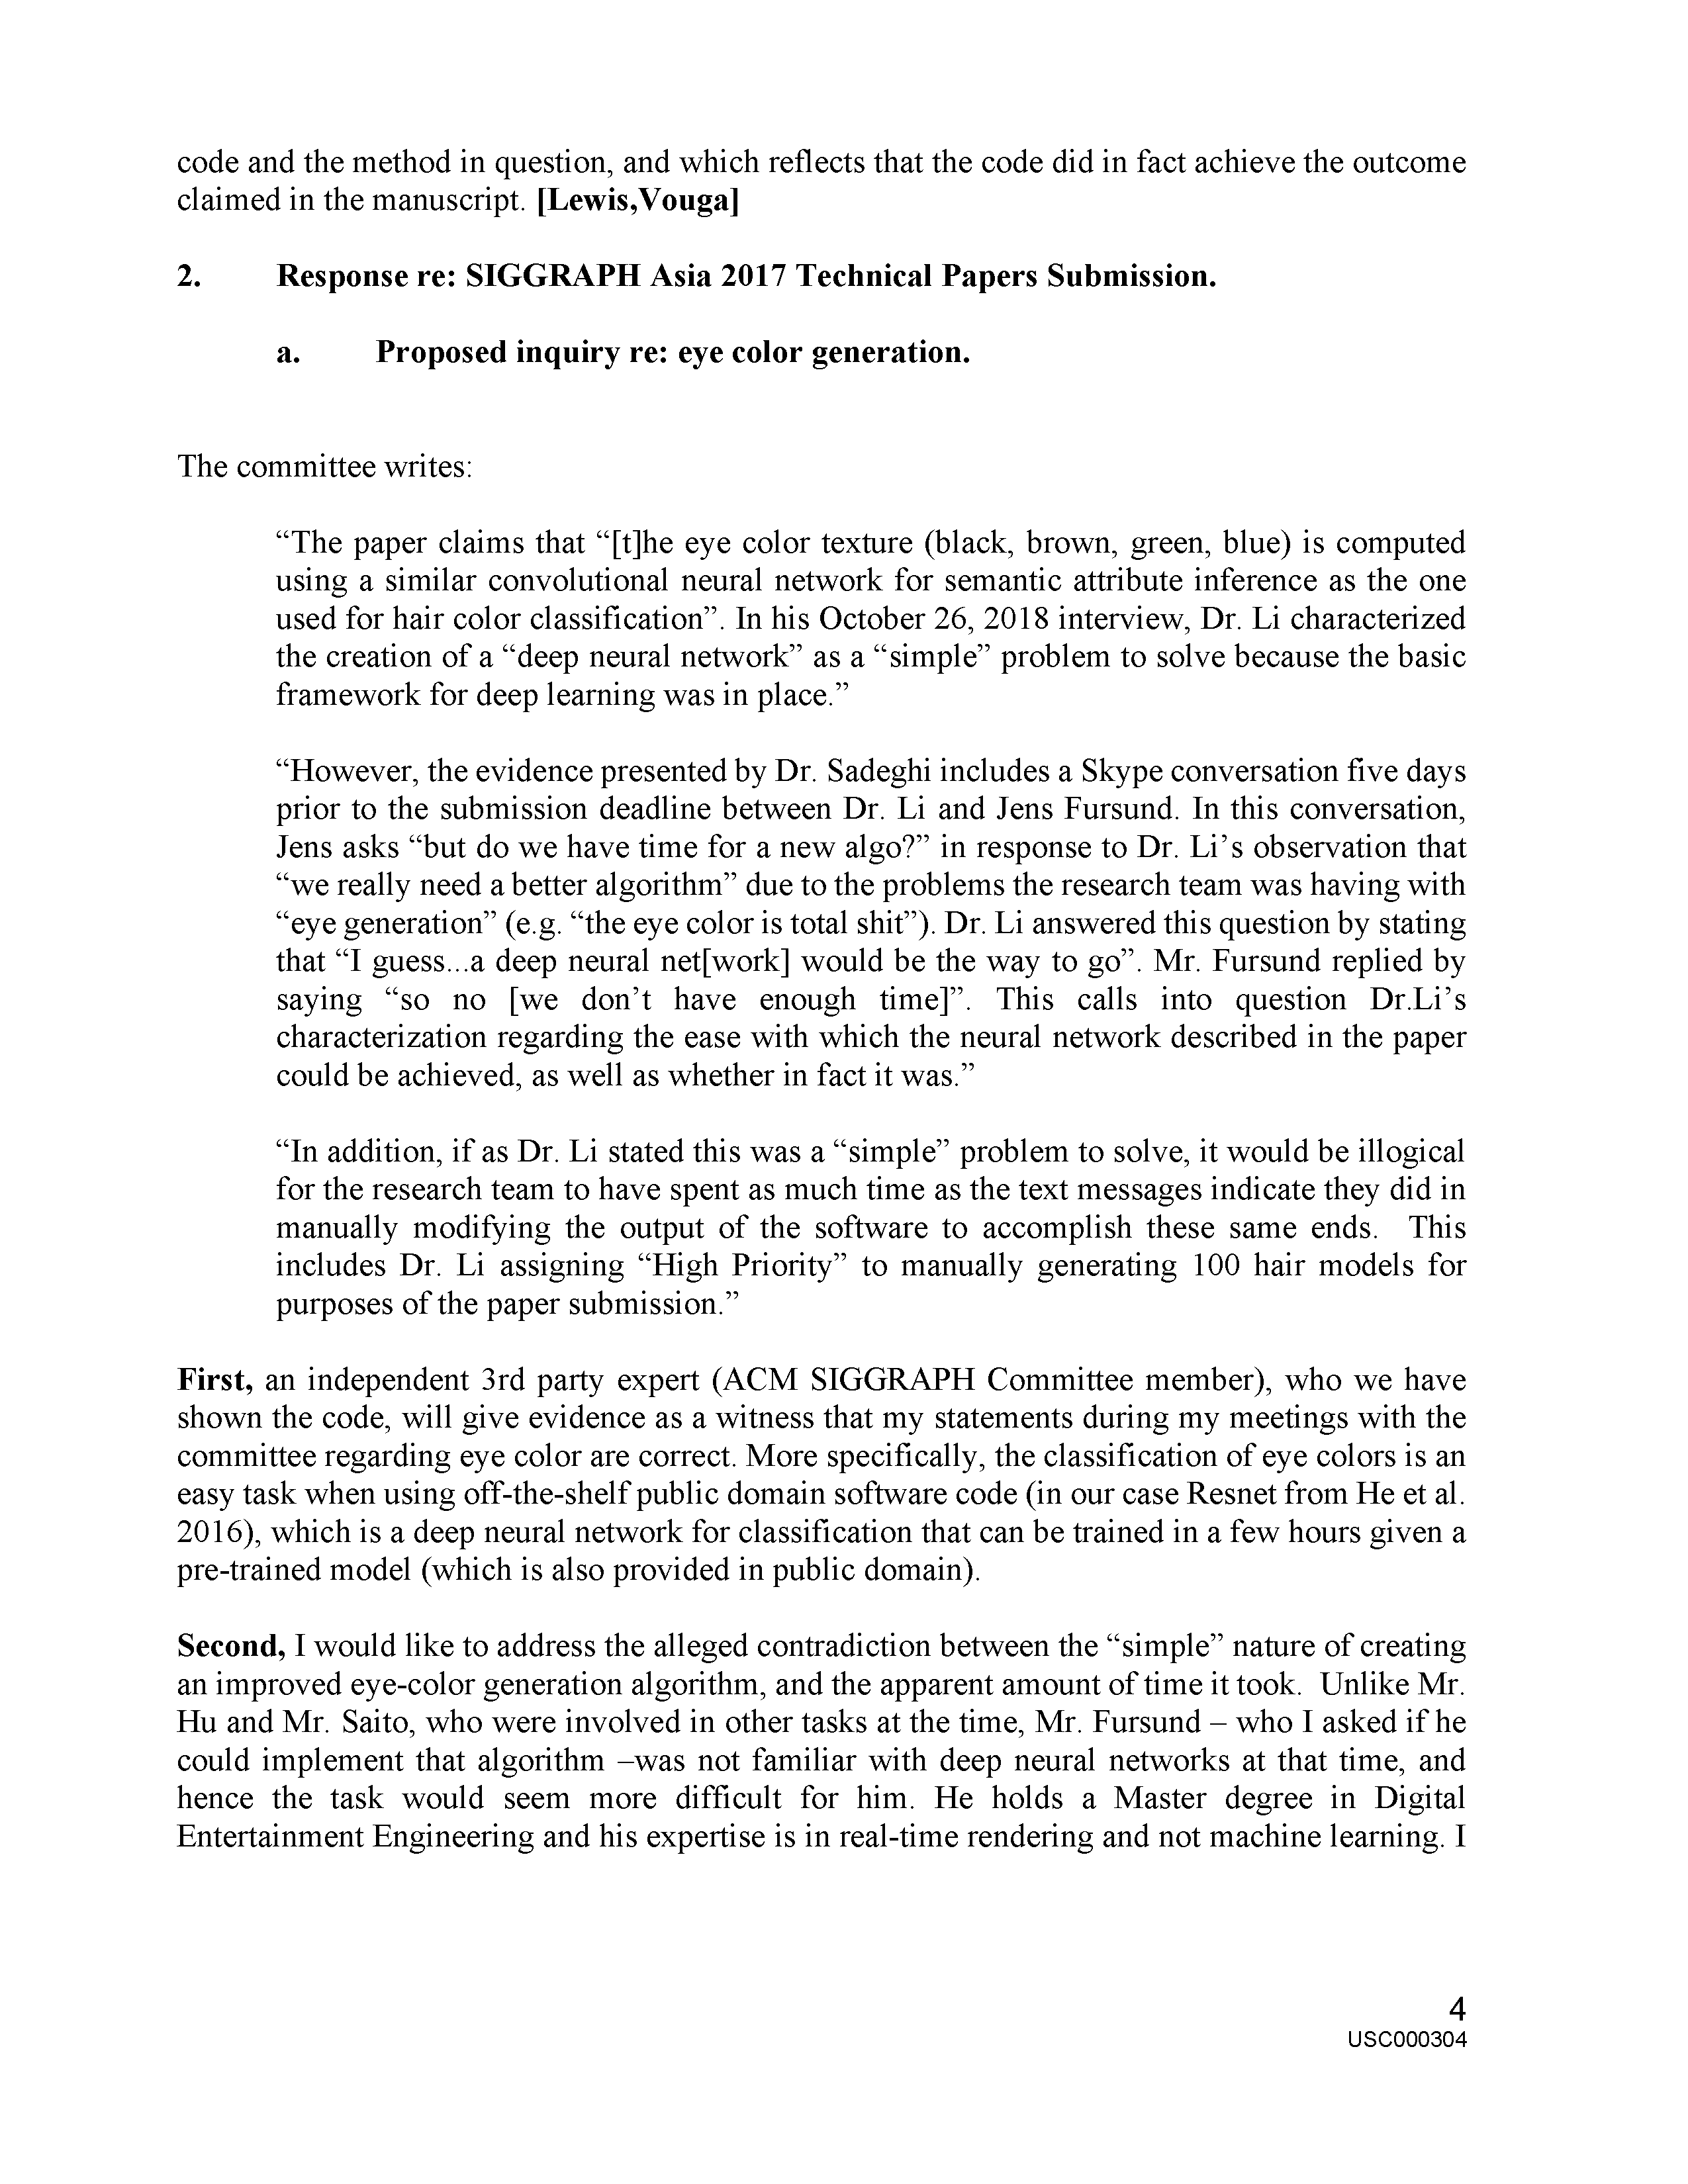 USC's Investigation Report re Hao Li's and Pinscreen's Scientific Misconduct at ACM SIGGRAPH RTL 2017 [Summary] Page 34